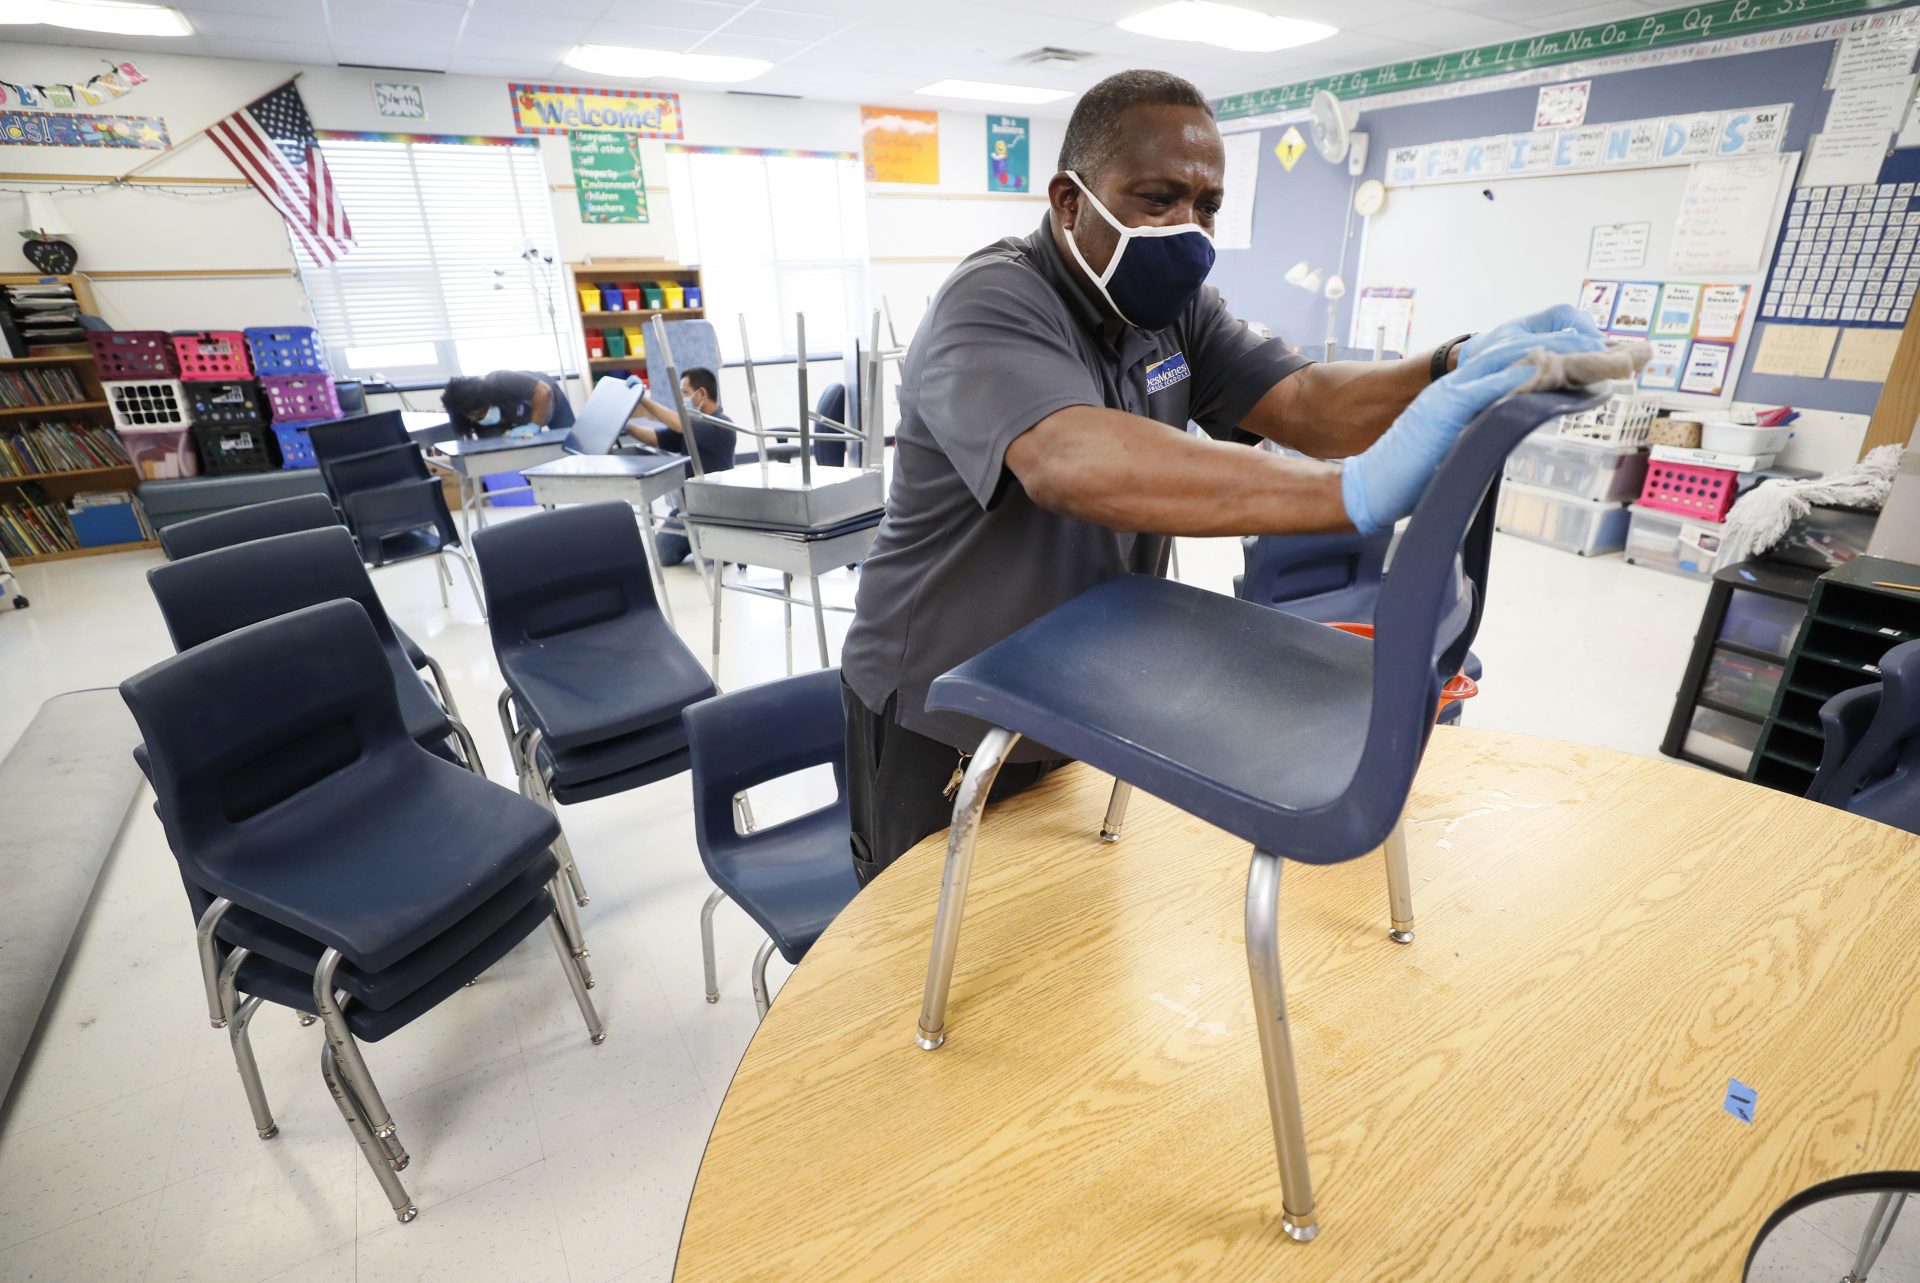 Des Moines Public Schools custodian Tracy Harris cleans chairs in a classroom at Brubaker Elementary School, Wednesday, July 8, 2020, in Des Moines, Iowa. Getting children back to school safely could mean keeping high-risk spots like bars and gyms closed. That's the latest thinking from some public health experts.